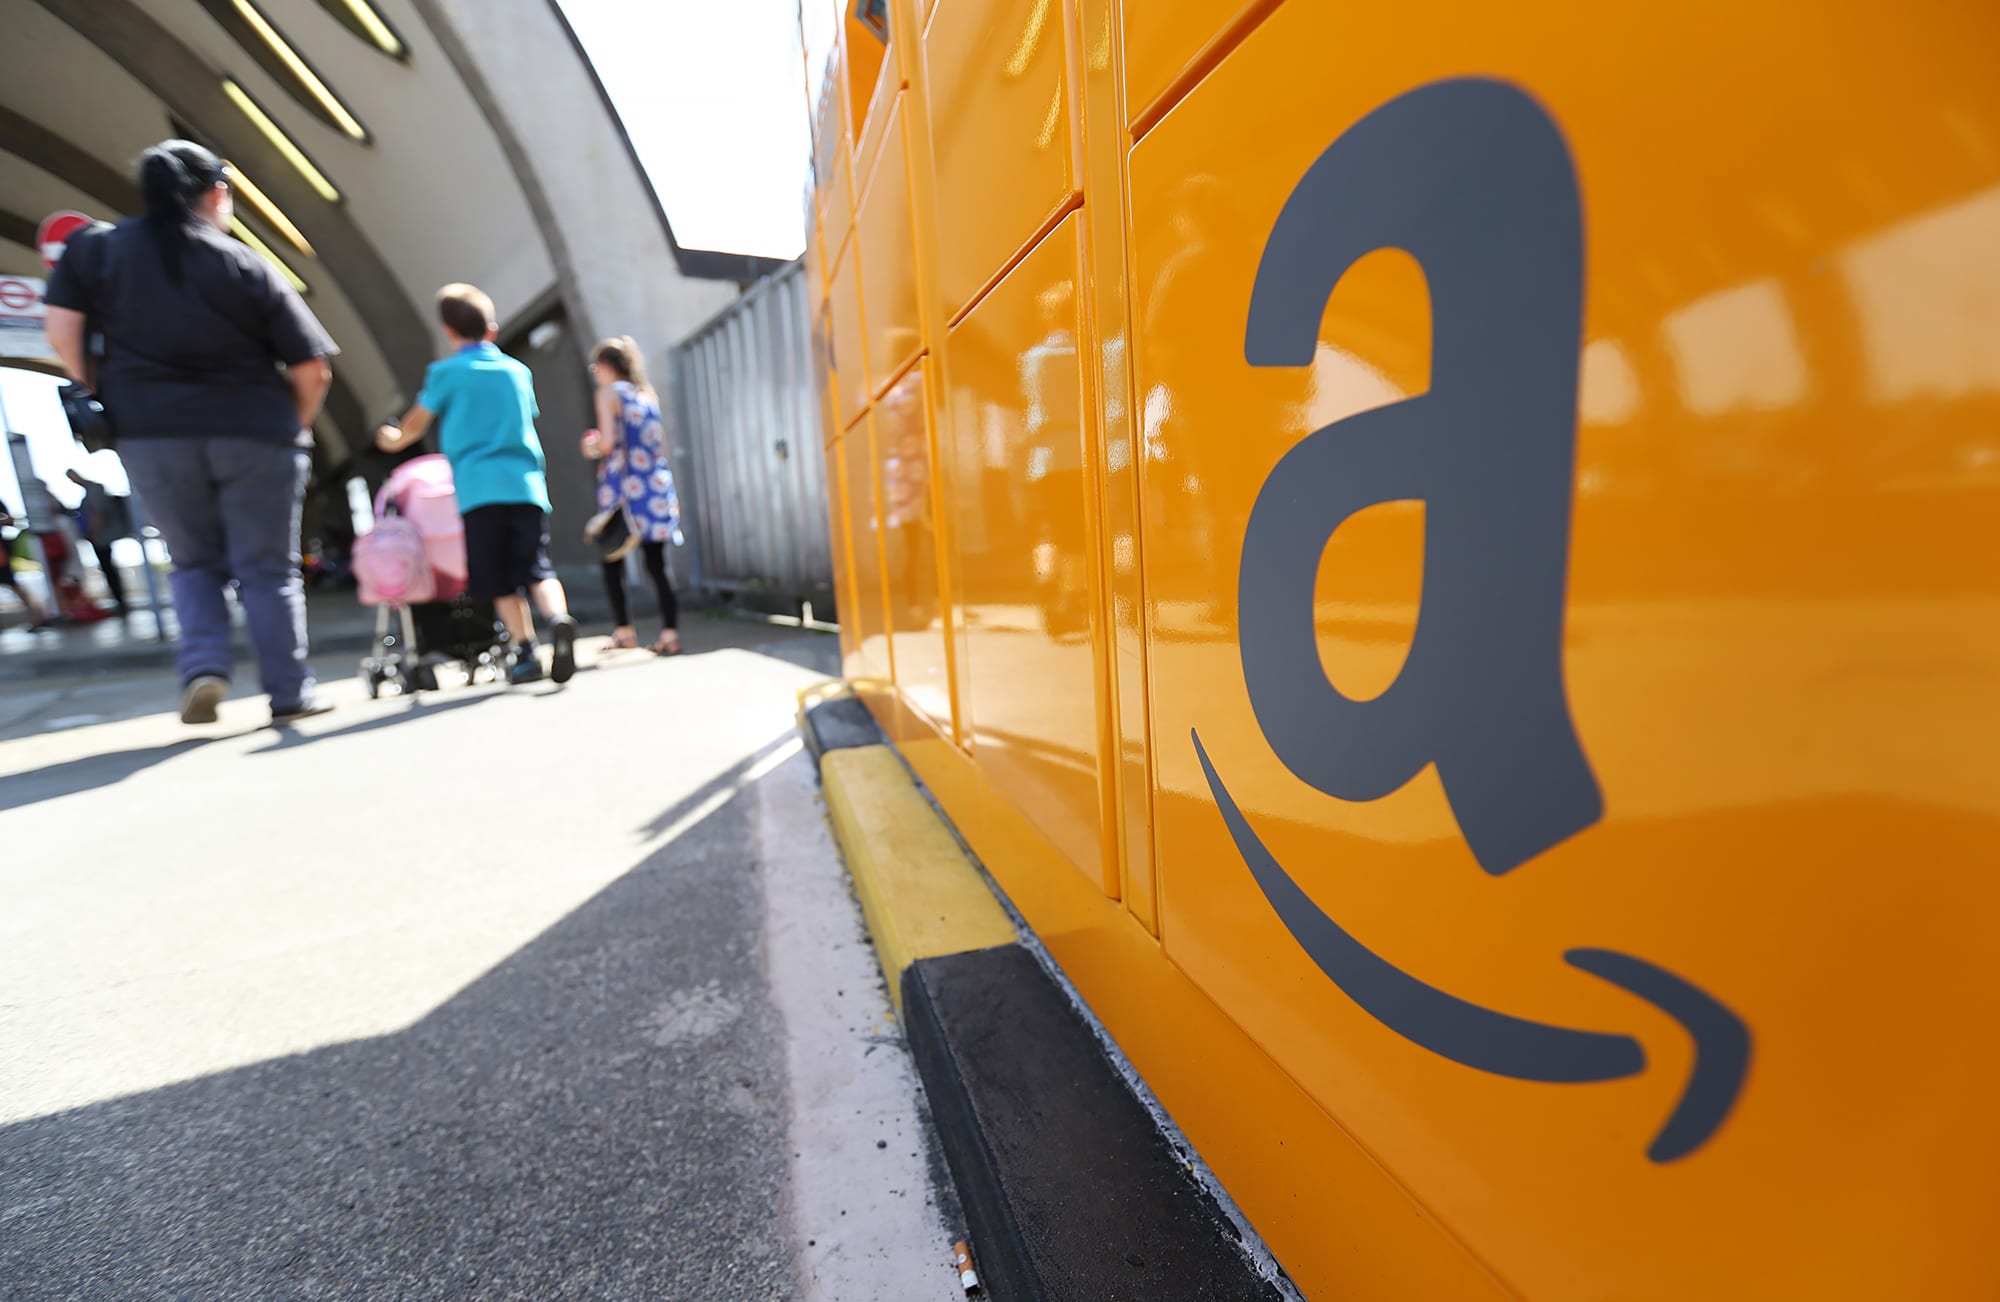 Amazon is building its own carbon-neutral UPS, Bank of America says